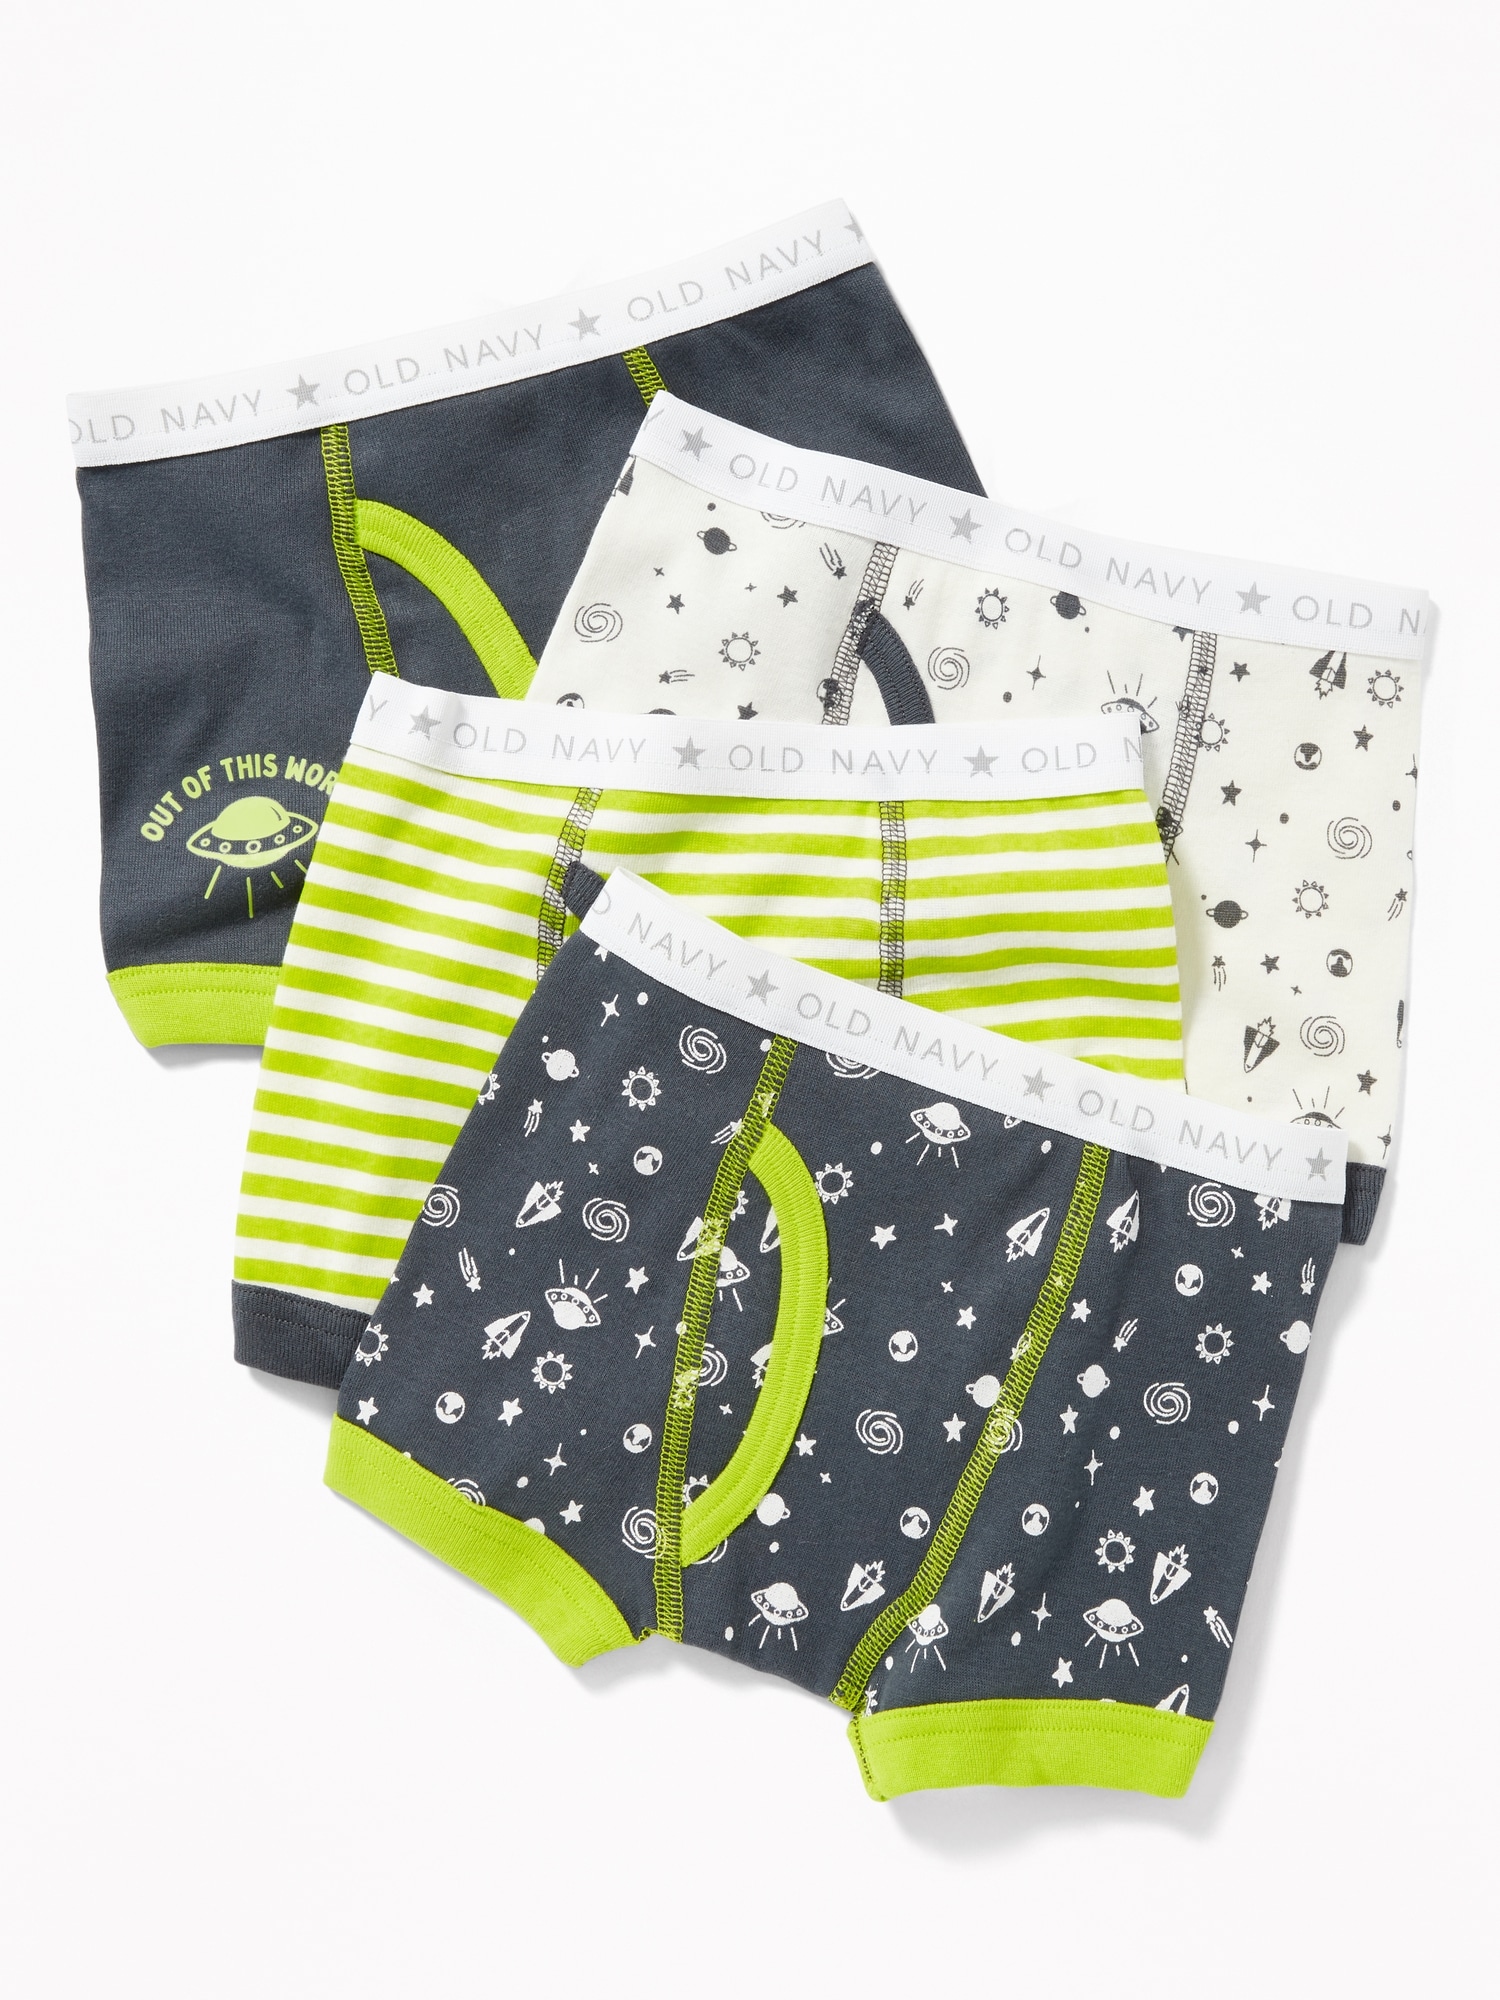 Boxer-Briefs 4-Pack for Toddler Boys, Old Navy